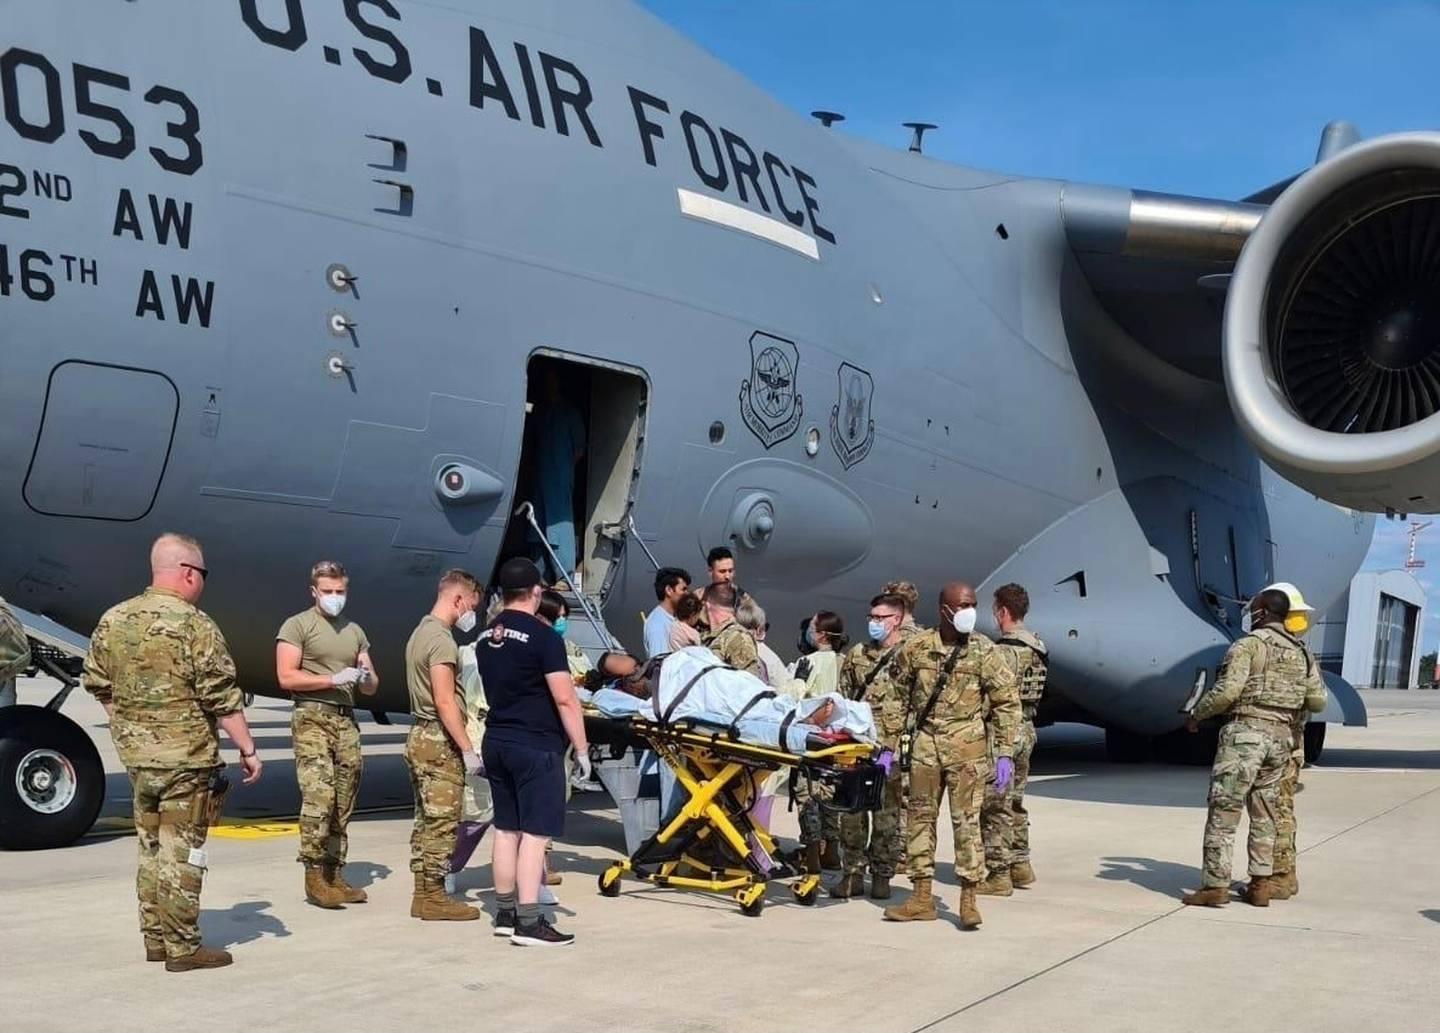 Medical support personnel from the 86th Medical Group and Landstuhl Regional Medical Center help an Afghan mother and family off a U.S. Air Force C-17, call sign Reach 828, moments after she delivered a child aboard the ai Afghan baby born on C-17 bound for Germany named â€˜Reach,â€™ after the jetâ€™s call sign